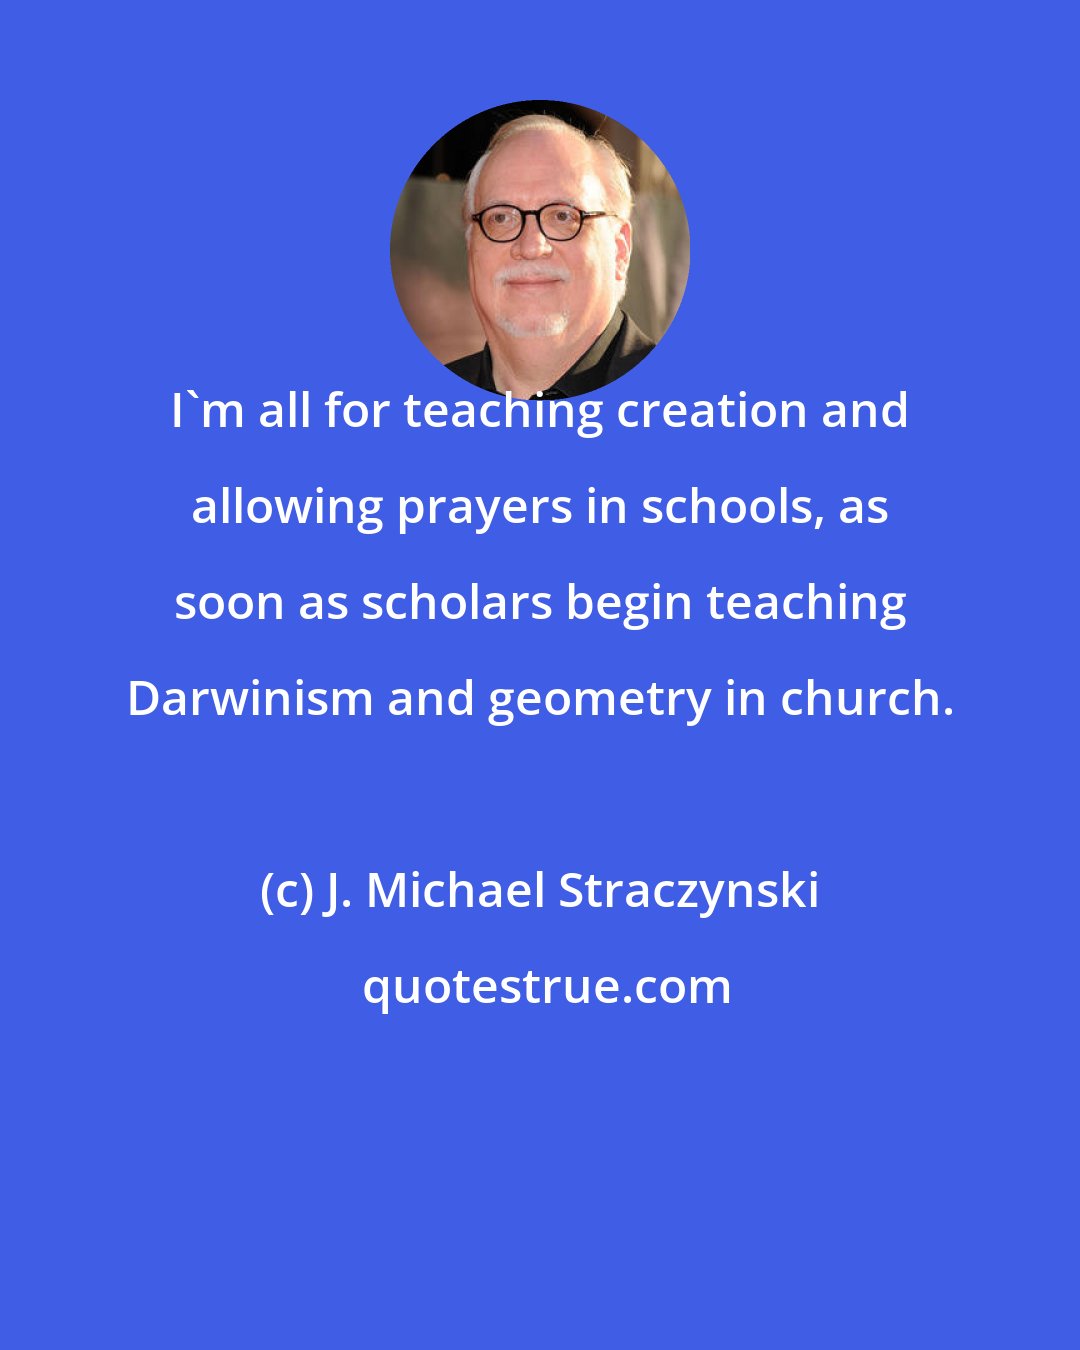 J. Michael Straczynski: I'm all for teaching creation and allowing prayers in schools, as soon as scholars begin teaching Darwinism and geometry in church.